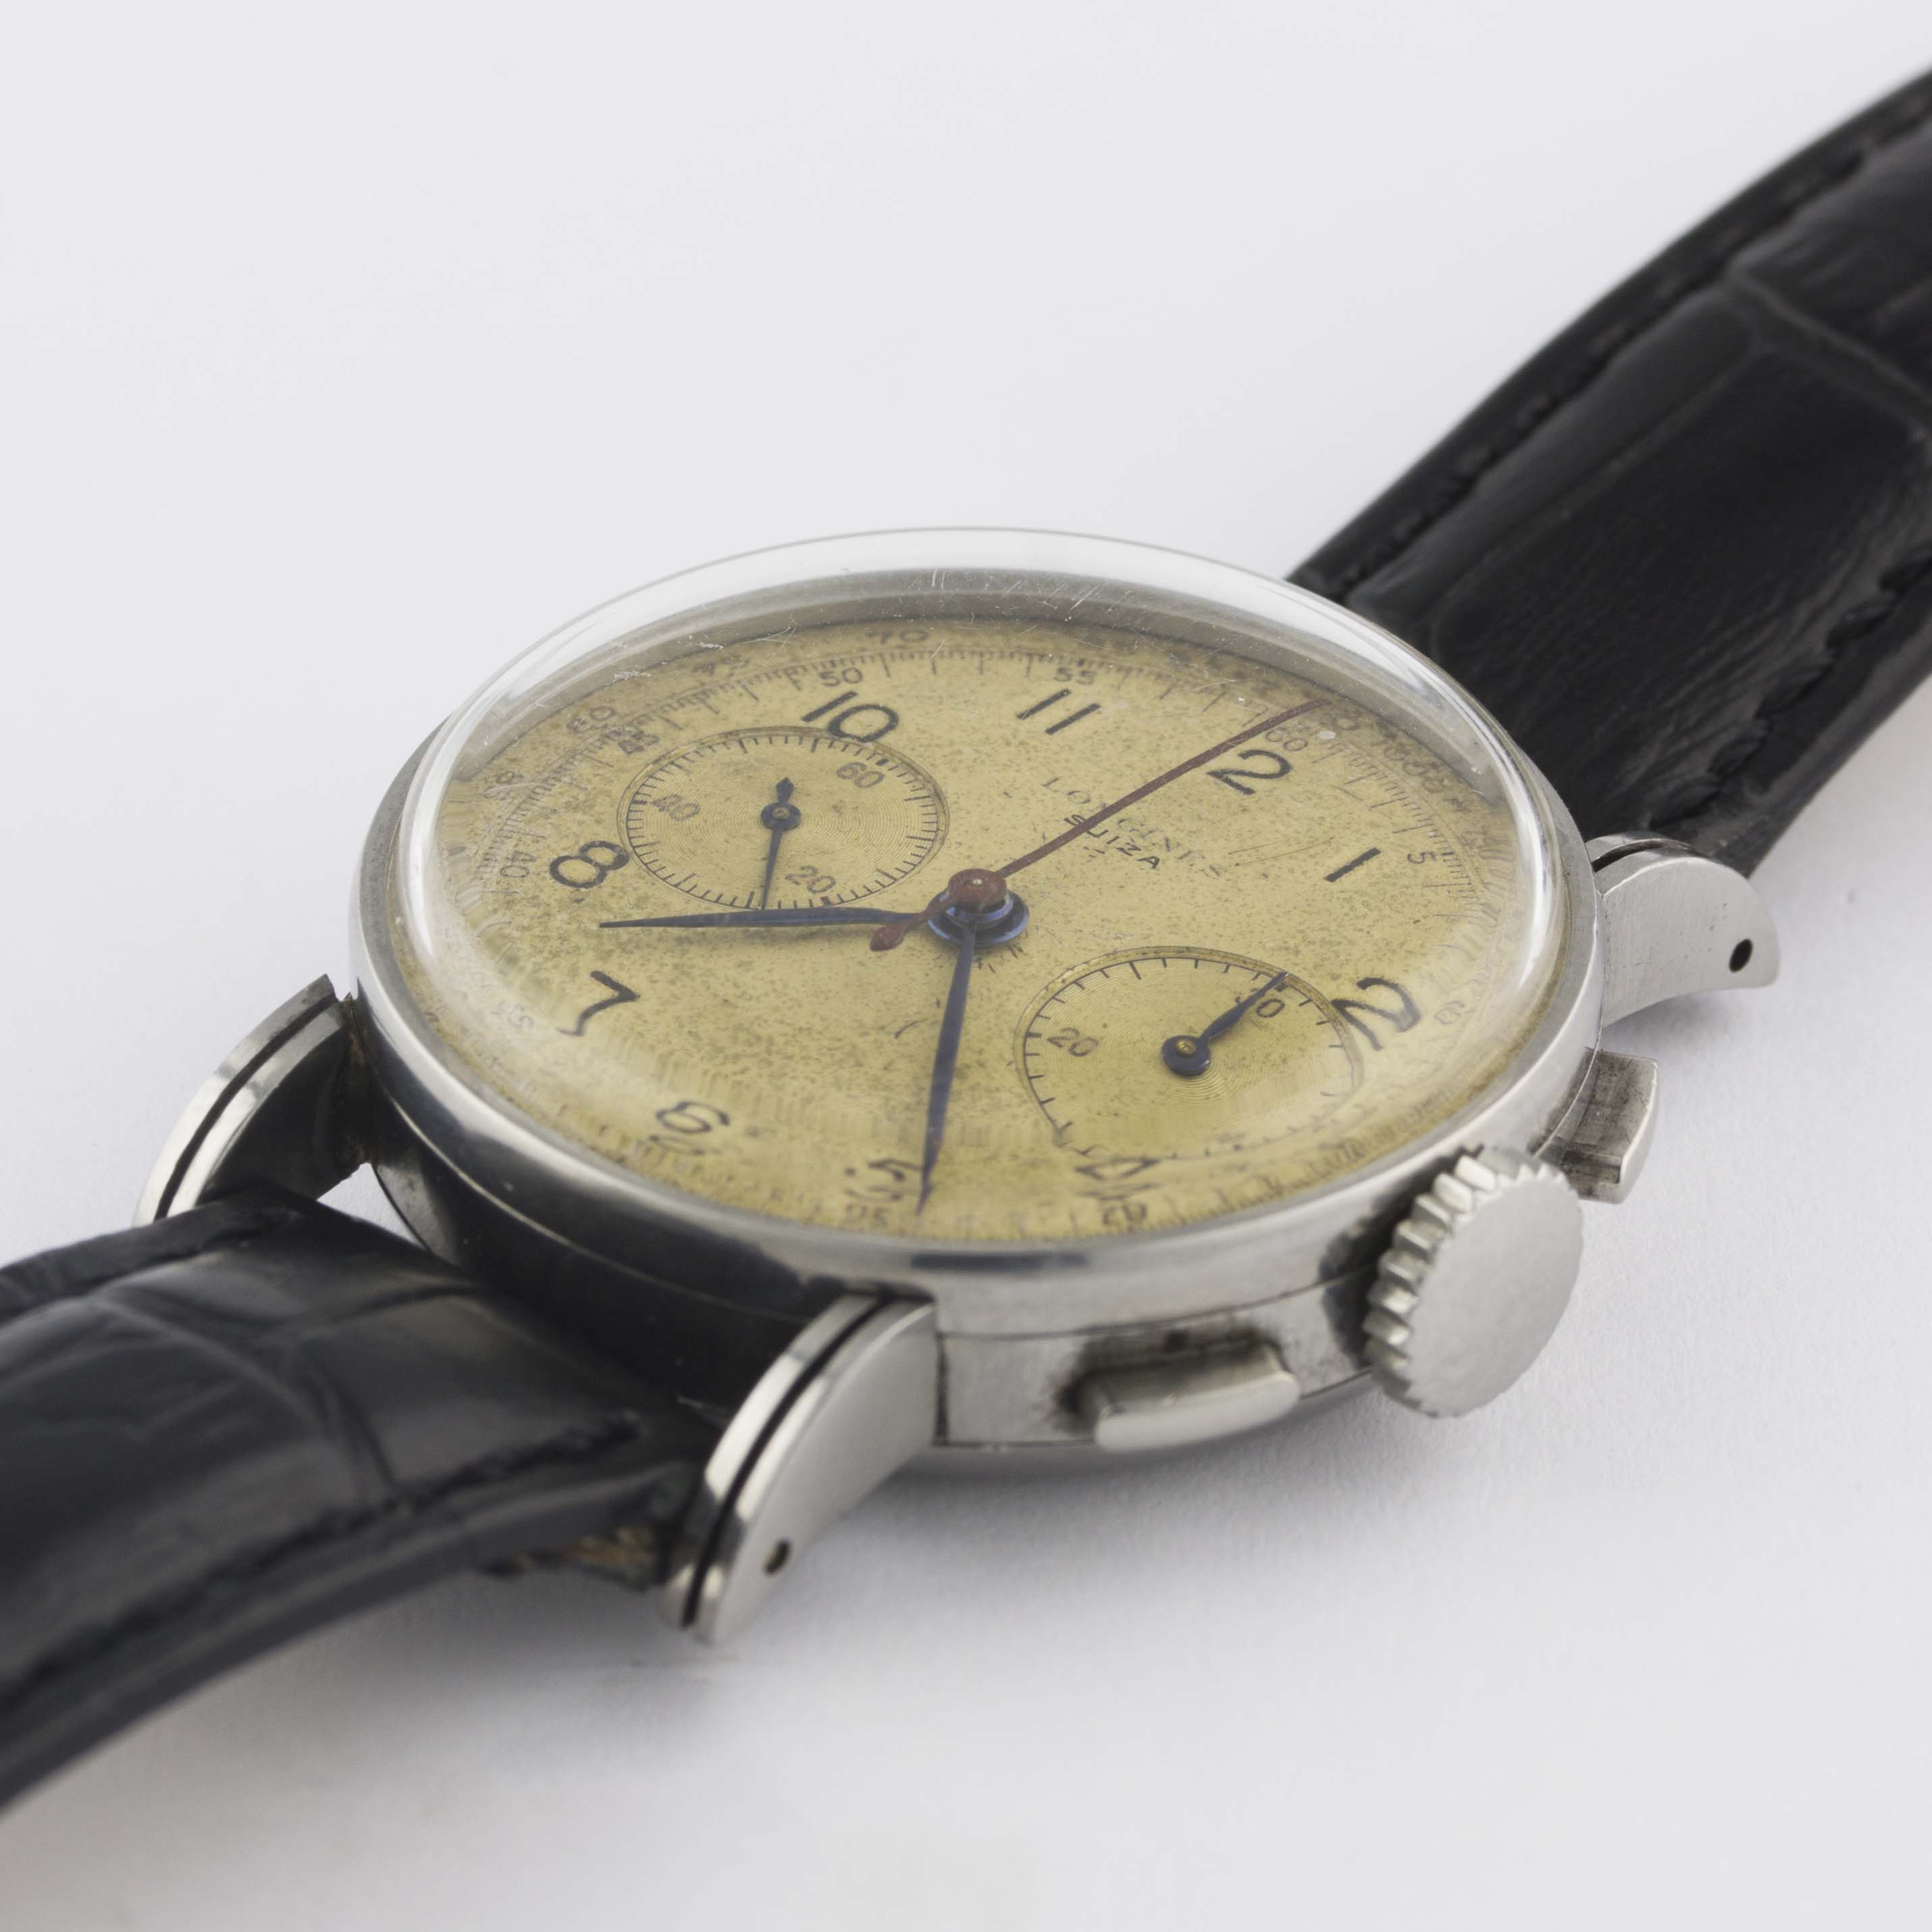 A GENTLEMAN'S STAINLESS STEEL LONGINES FLYBACK CHRONOGRAPH WRIST WATCH CIRCA 1946, REF. 3226 - Image 3 of 10